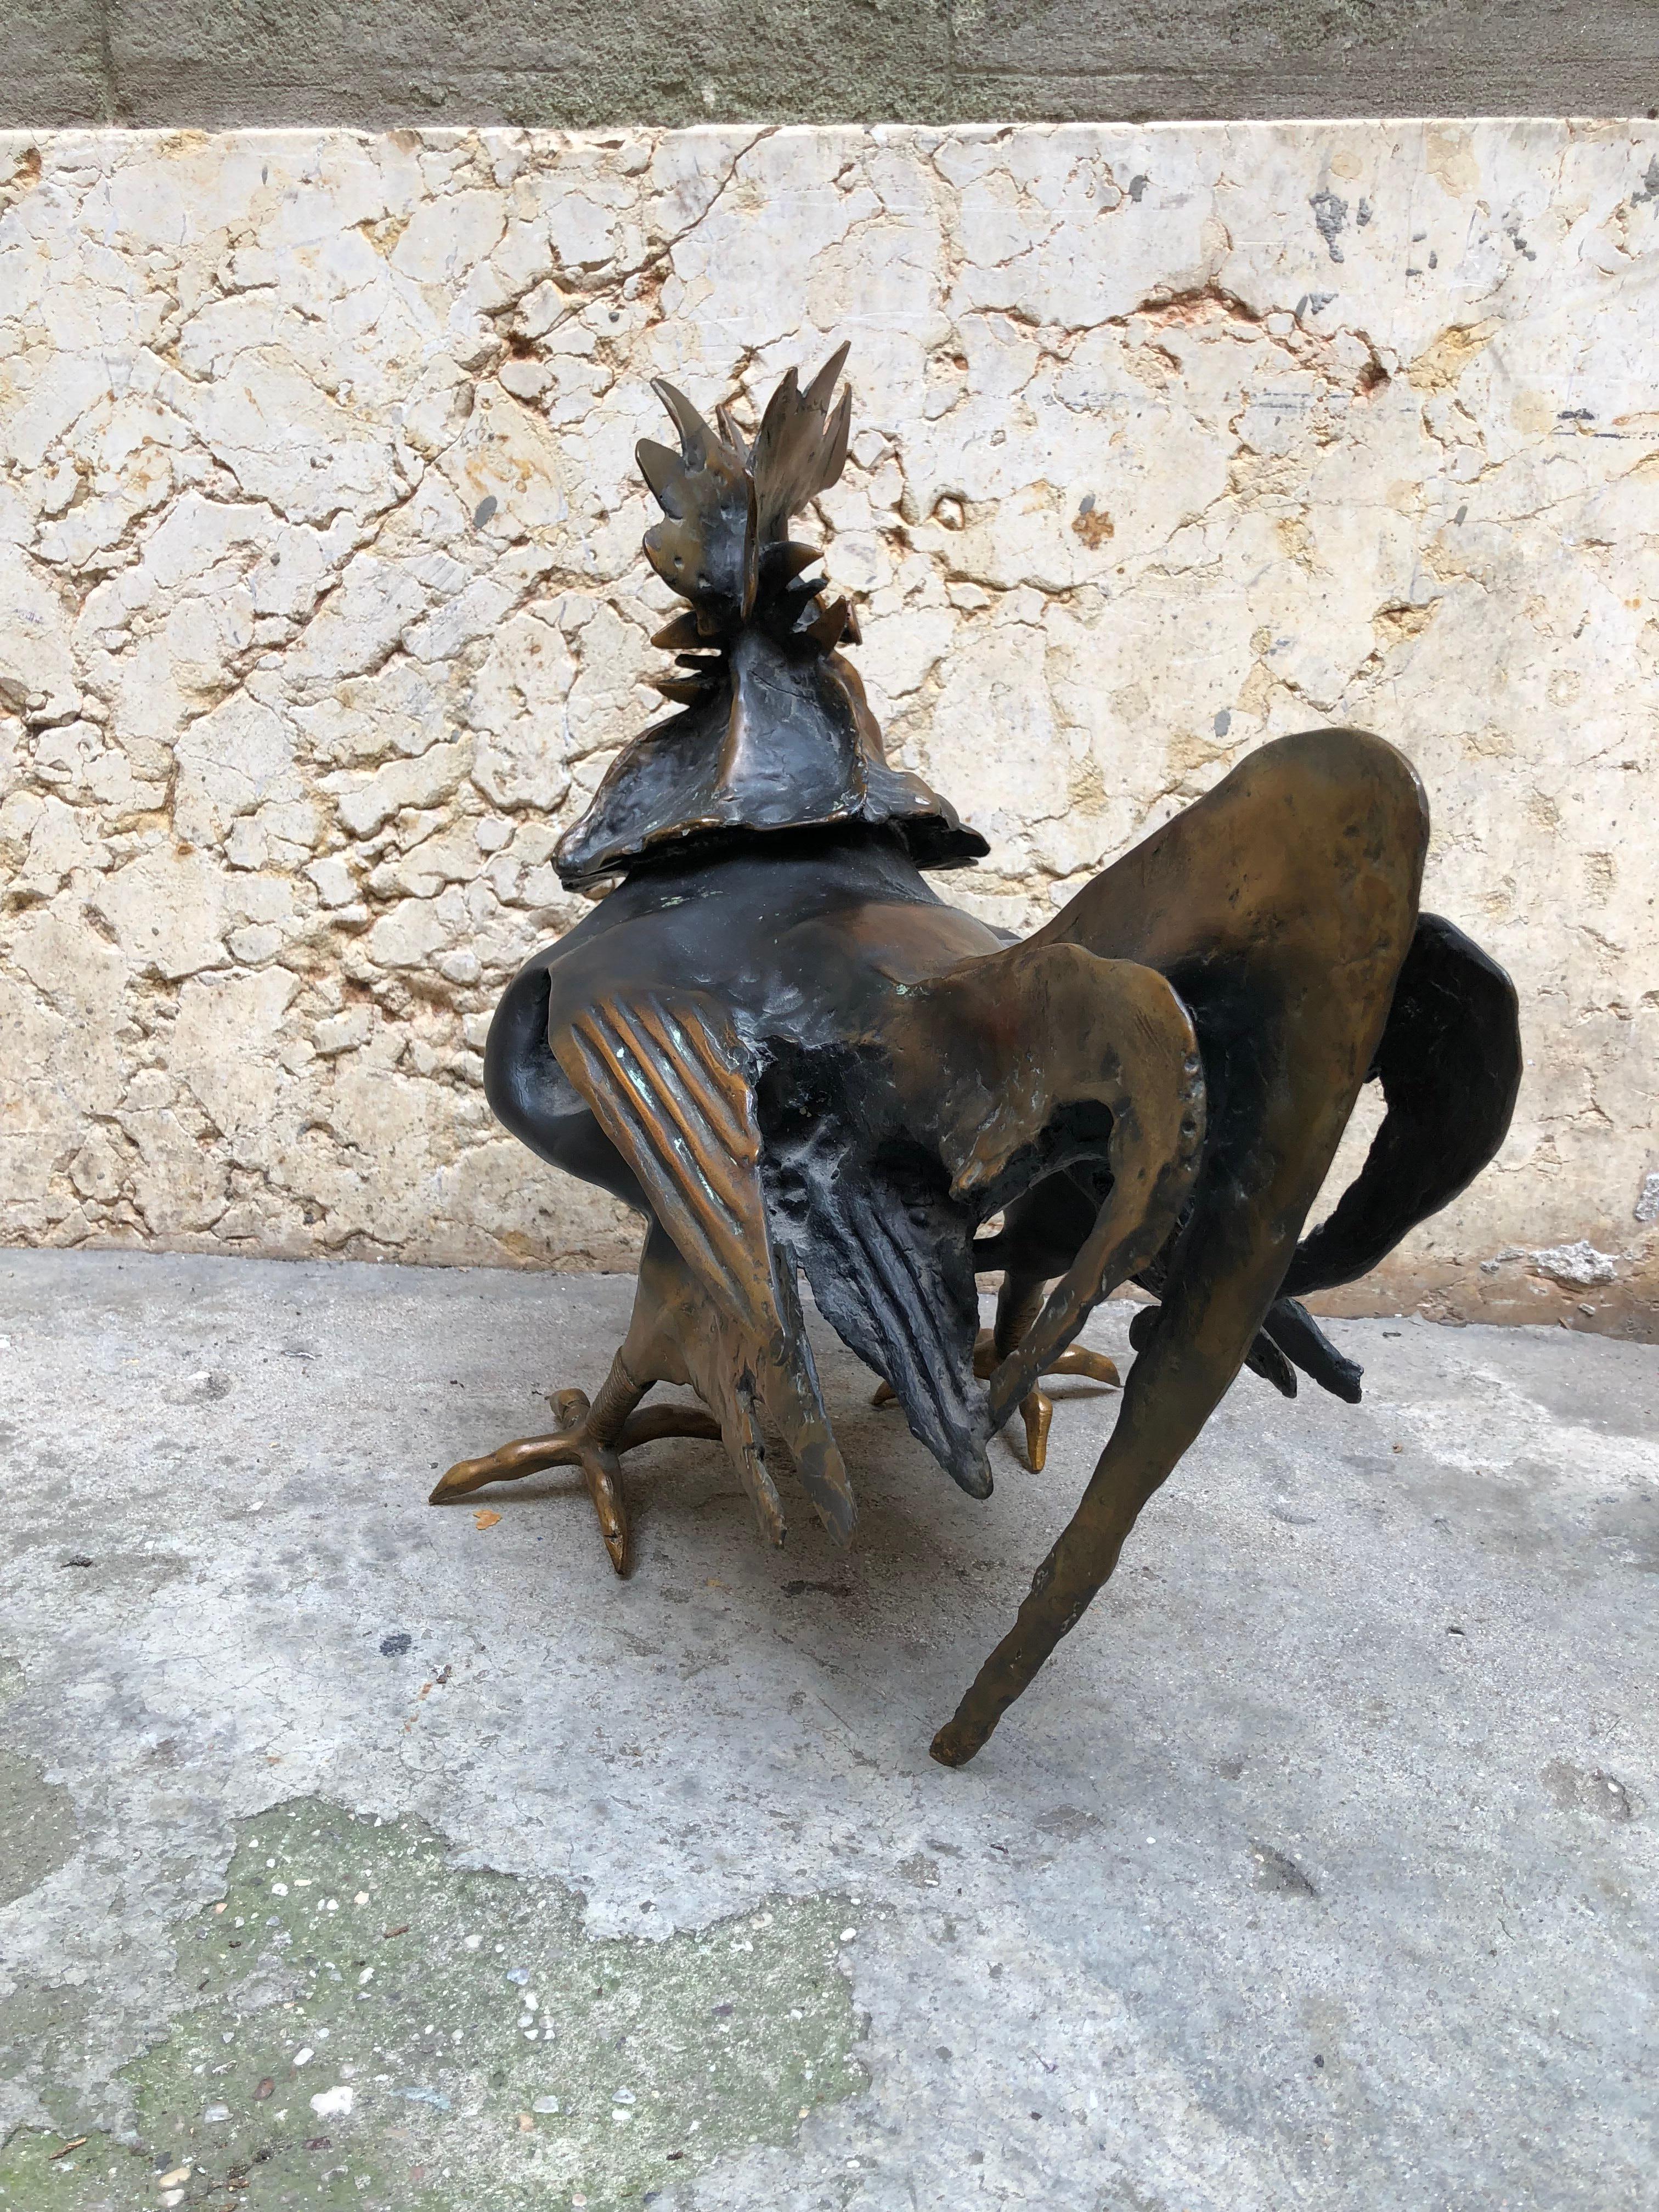 Animal bronze sculpture representing a rooster by Luciano Minguzzi (1911-2004), named 